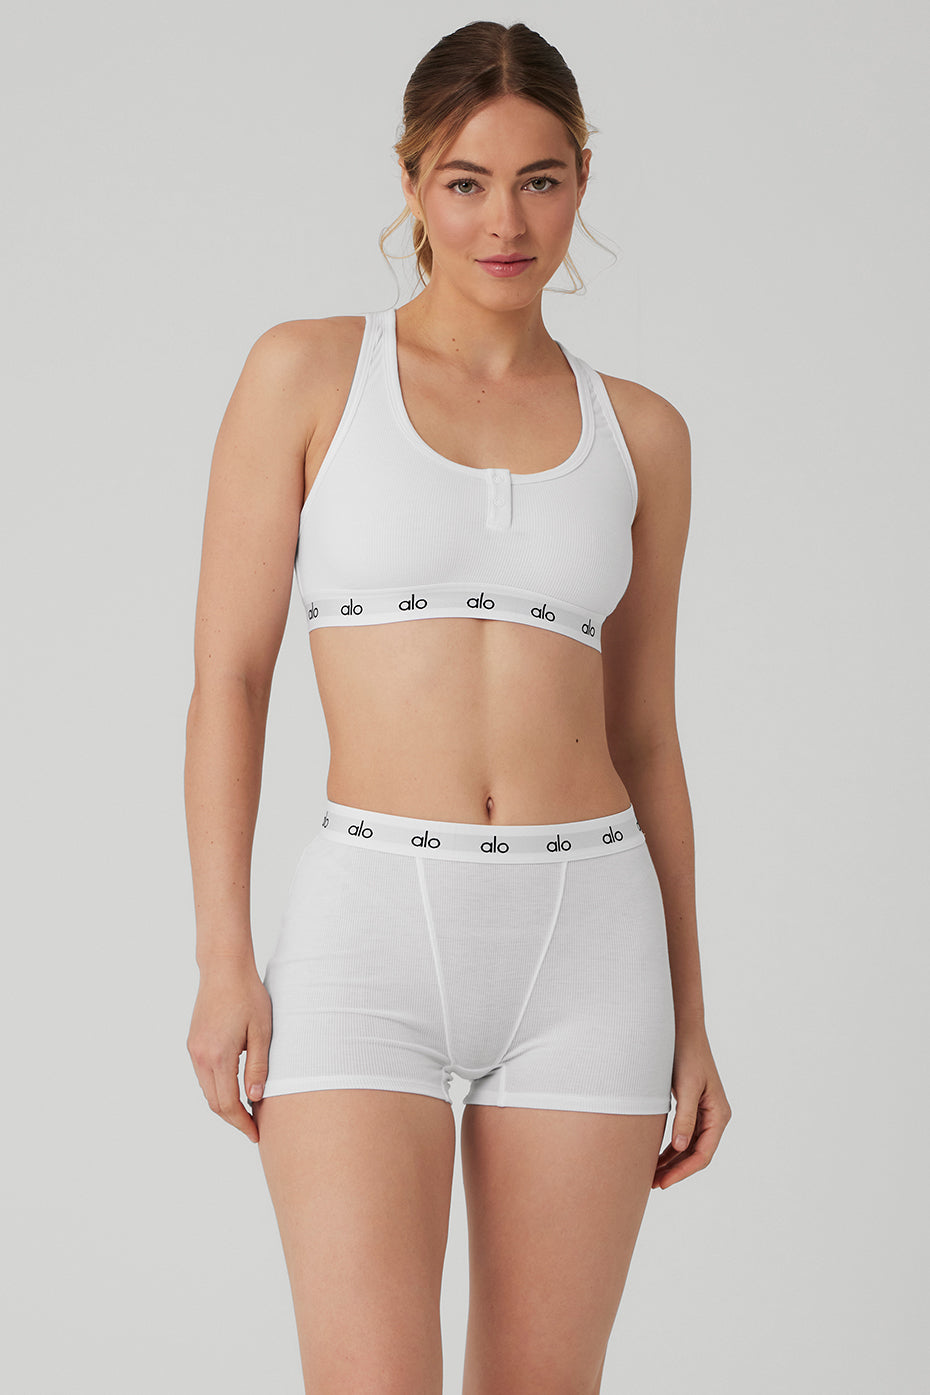 Alo Catch The Vibe Bra in Ivory sz Small nwt Soldout